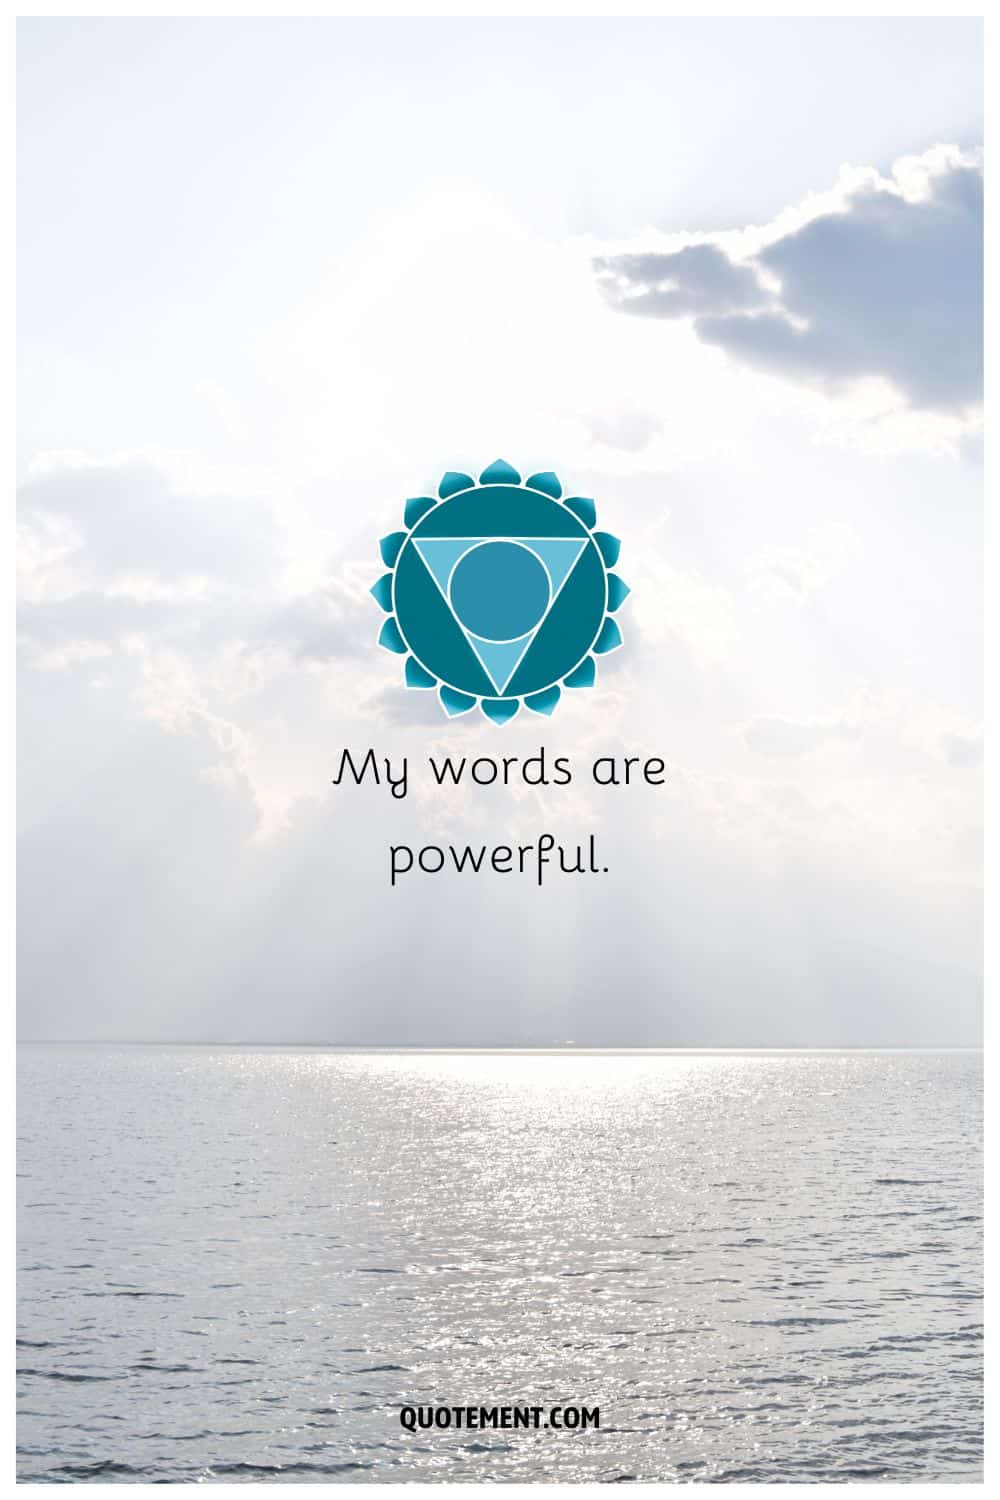 “My words are powerful.”